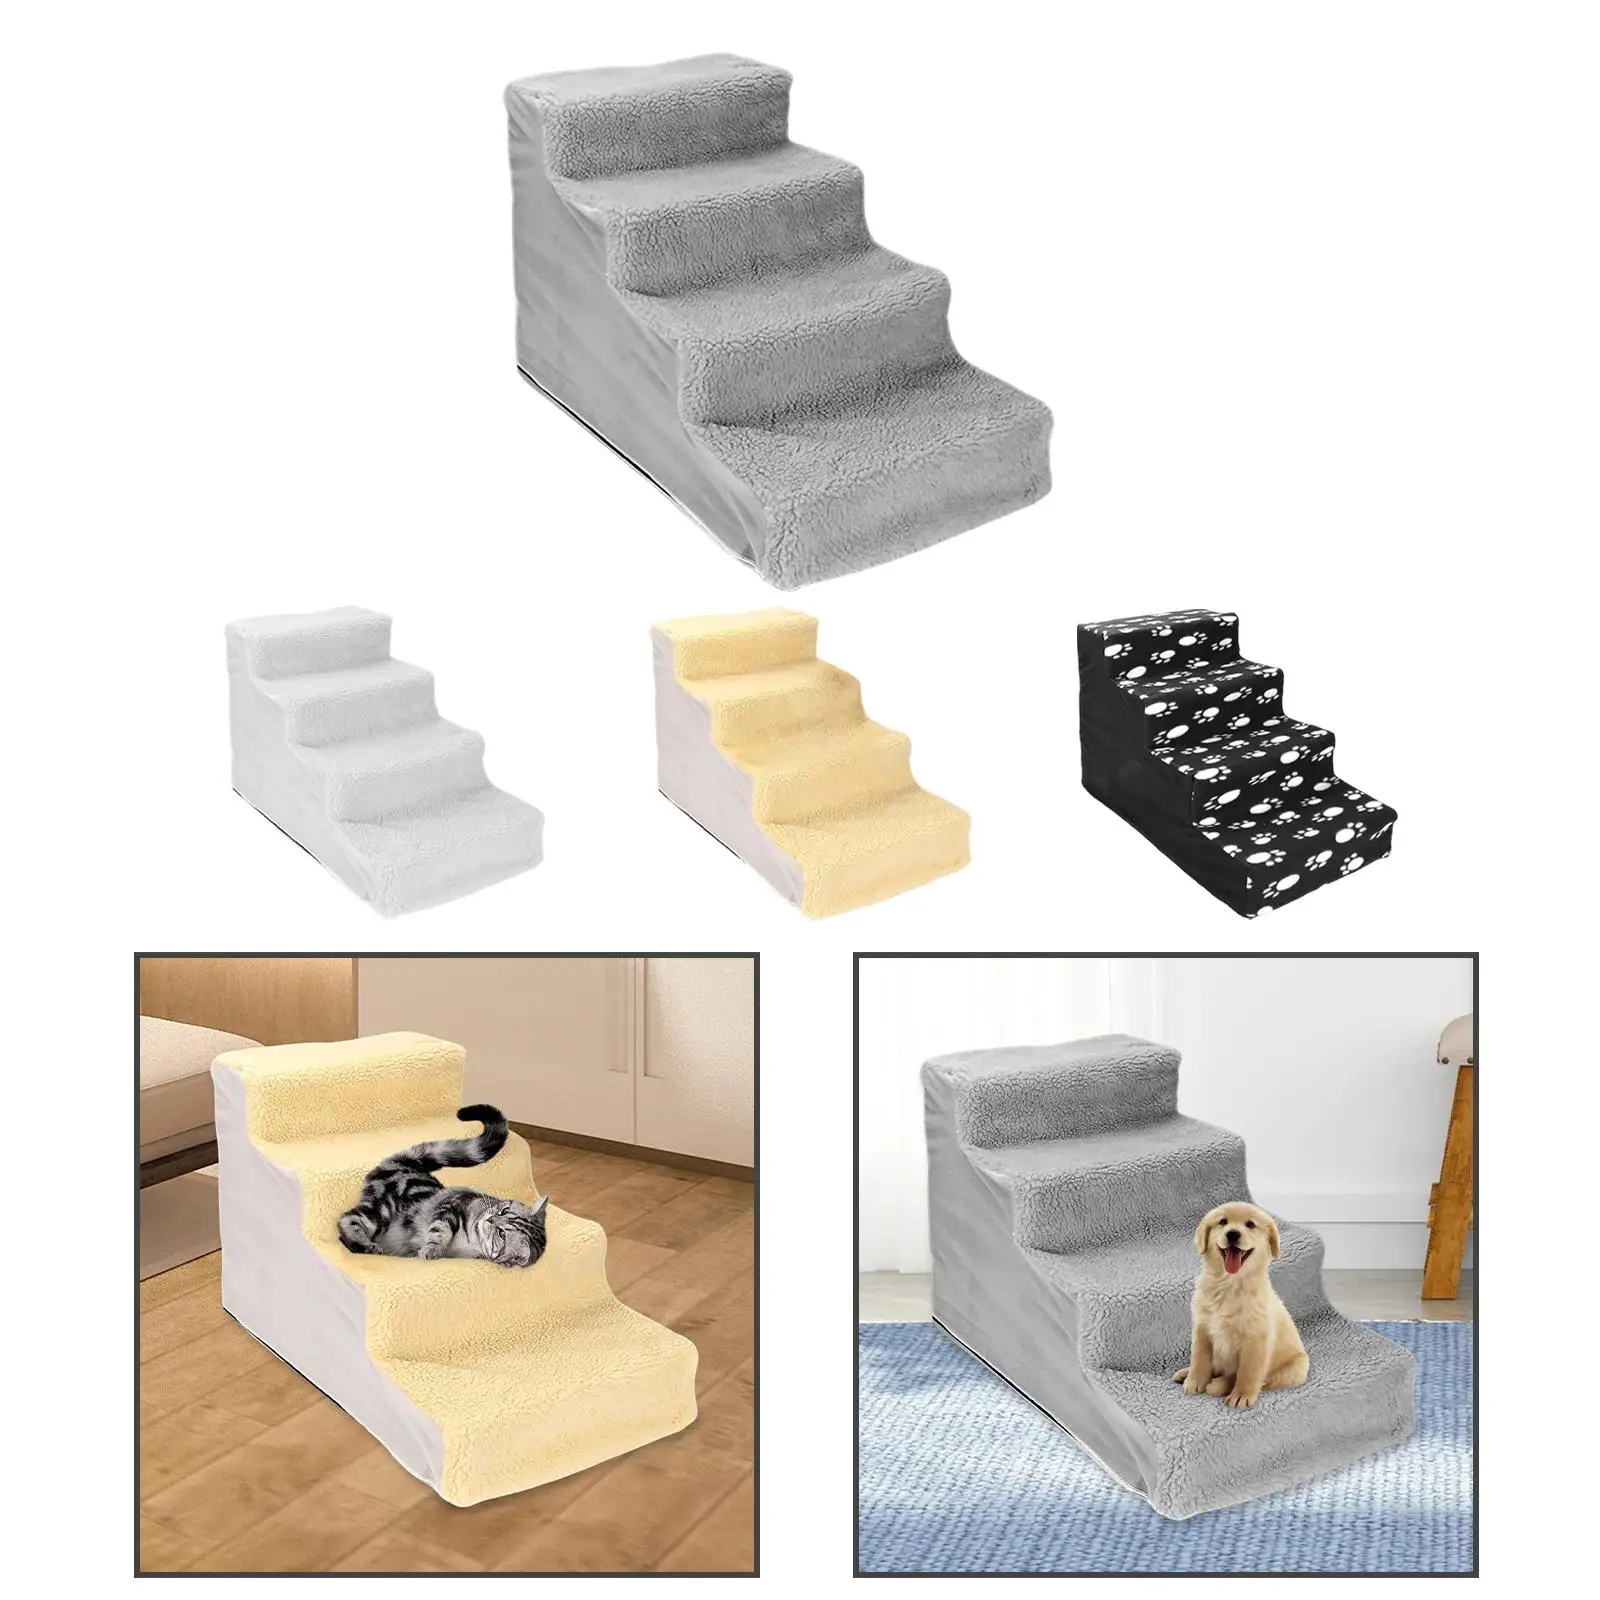 Portable Pet Dog Stairs Ladder Ramp Soft Warm Cover Removable Cat Climbing Washable Stairs 4 Steps Pet Supplies for Sofa Indoor